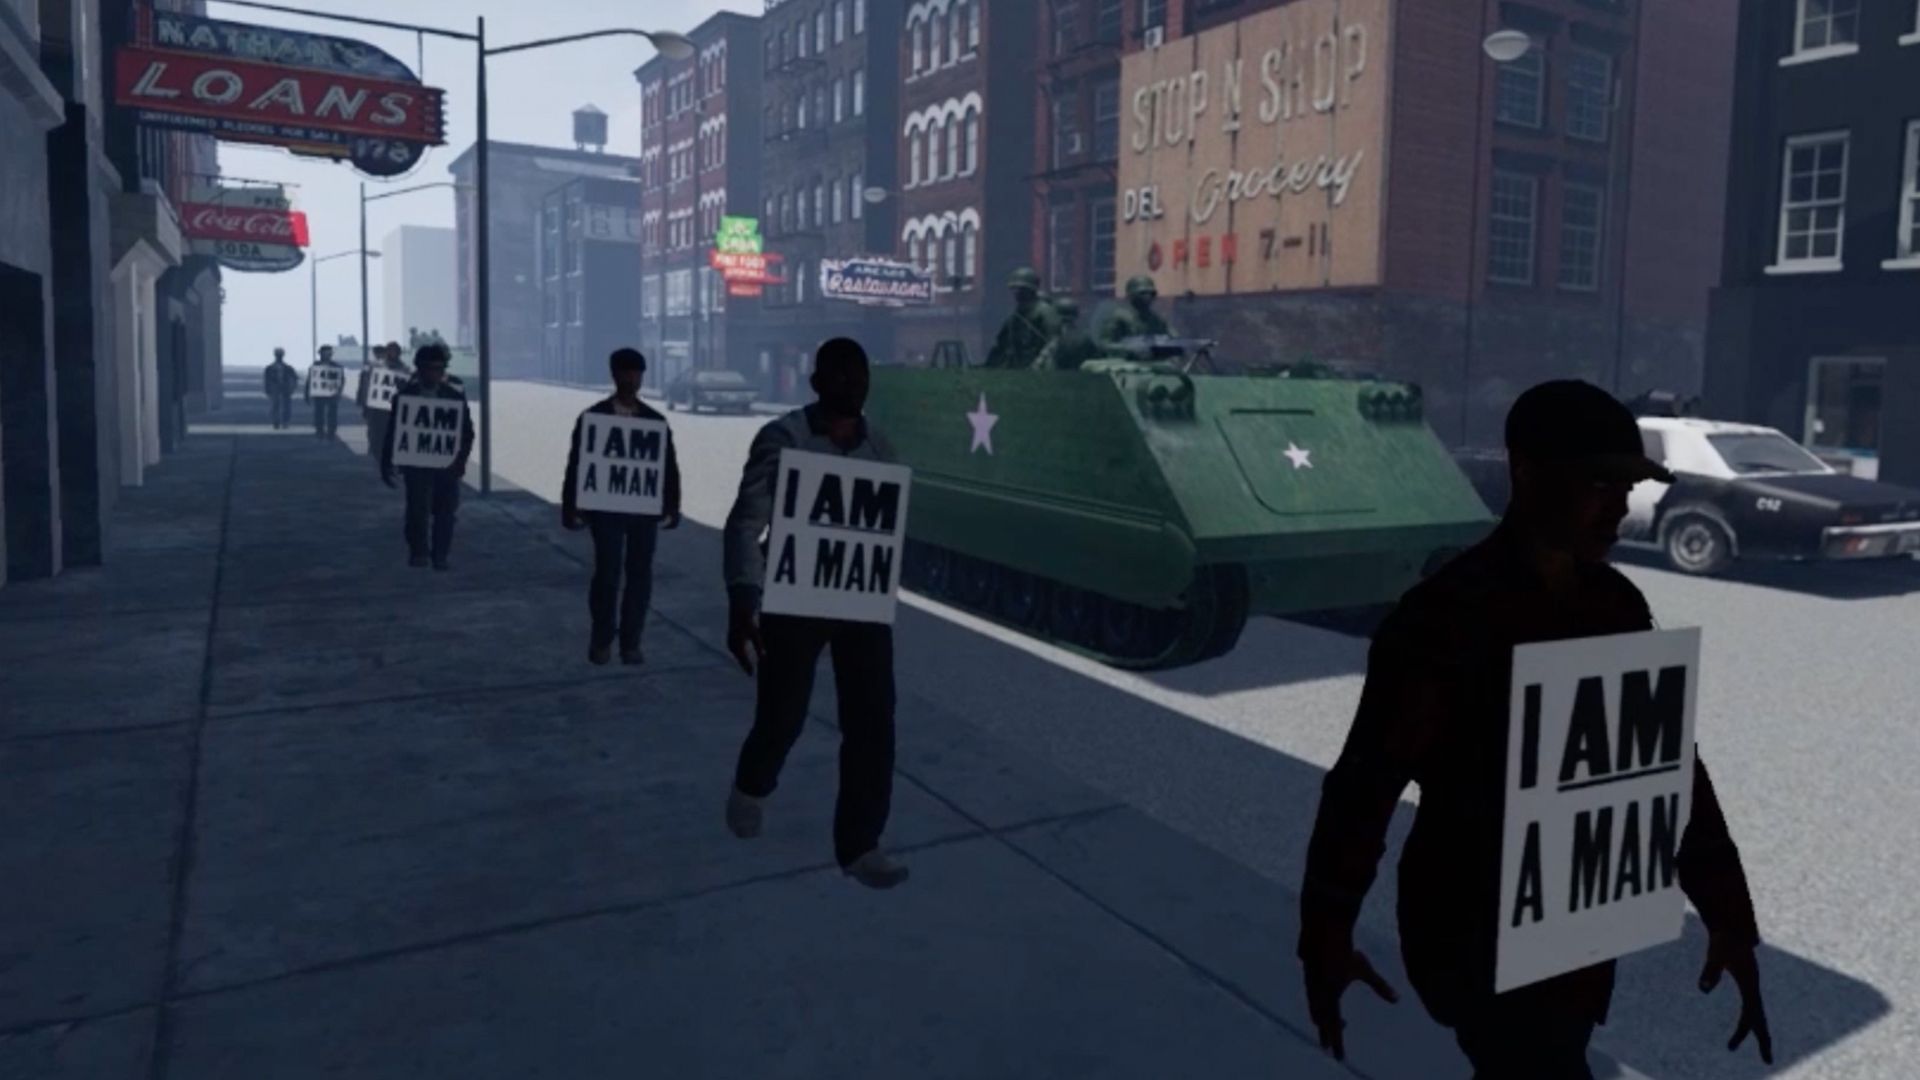 Image of the VR film "I Am A Man" shows protesters for the 1968 Memphis sanitation workers' strike